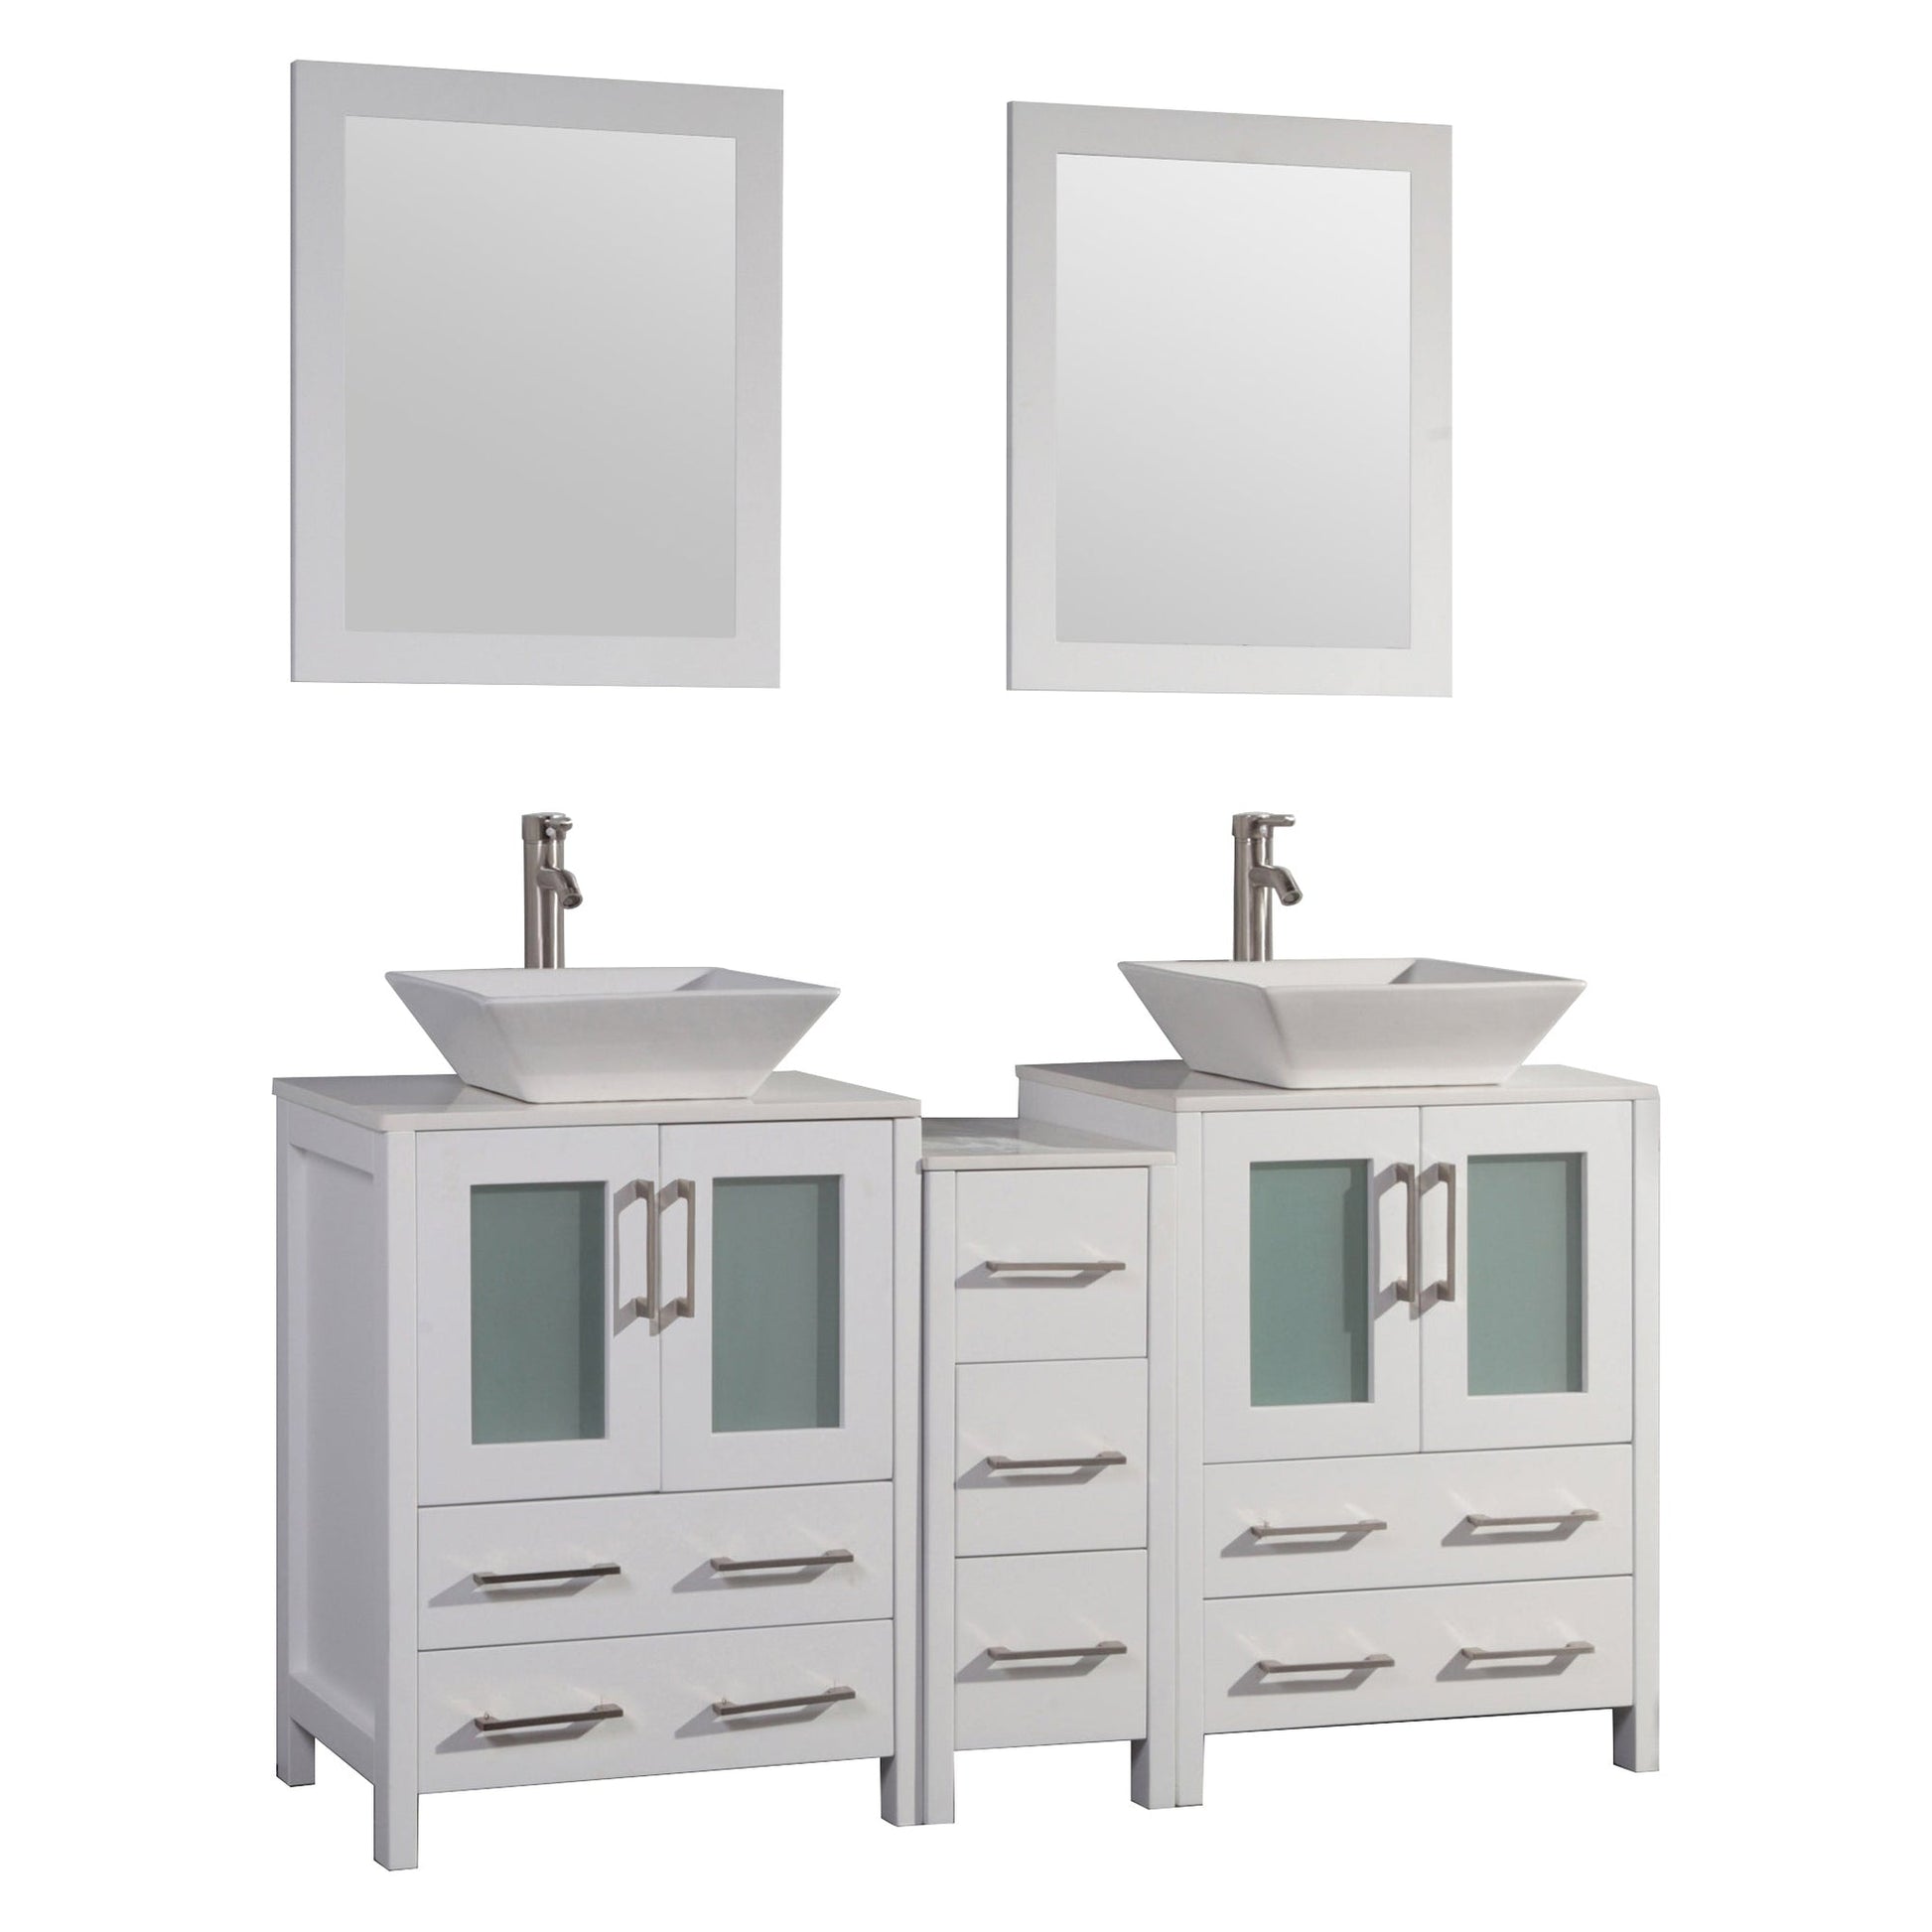 Vanity Art Ravenna 60" Double White Freestanding Vanity Set With White Engineered Marble Top, 2 Ceramic Vessel Sinks, 1 Side Cabinet and 2 Mirrors